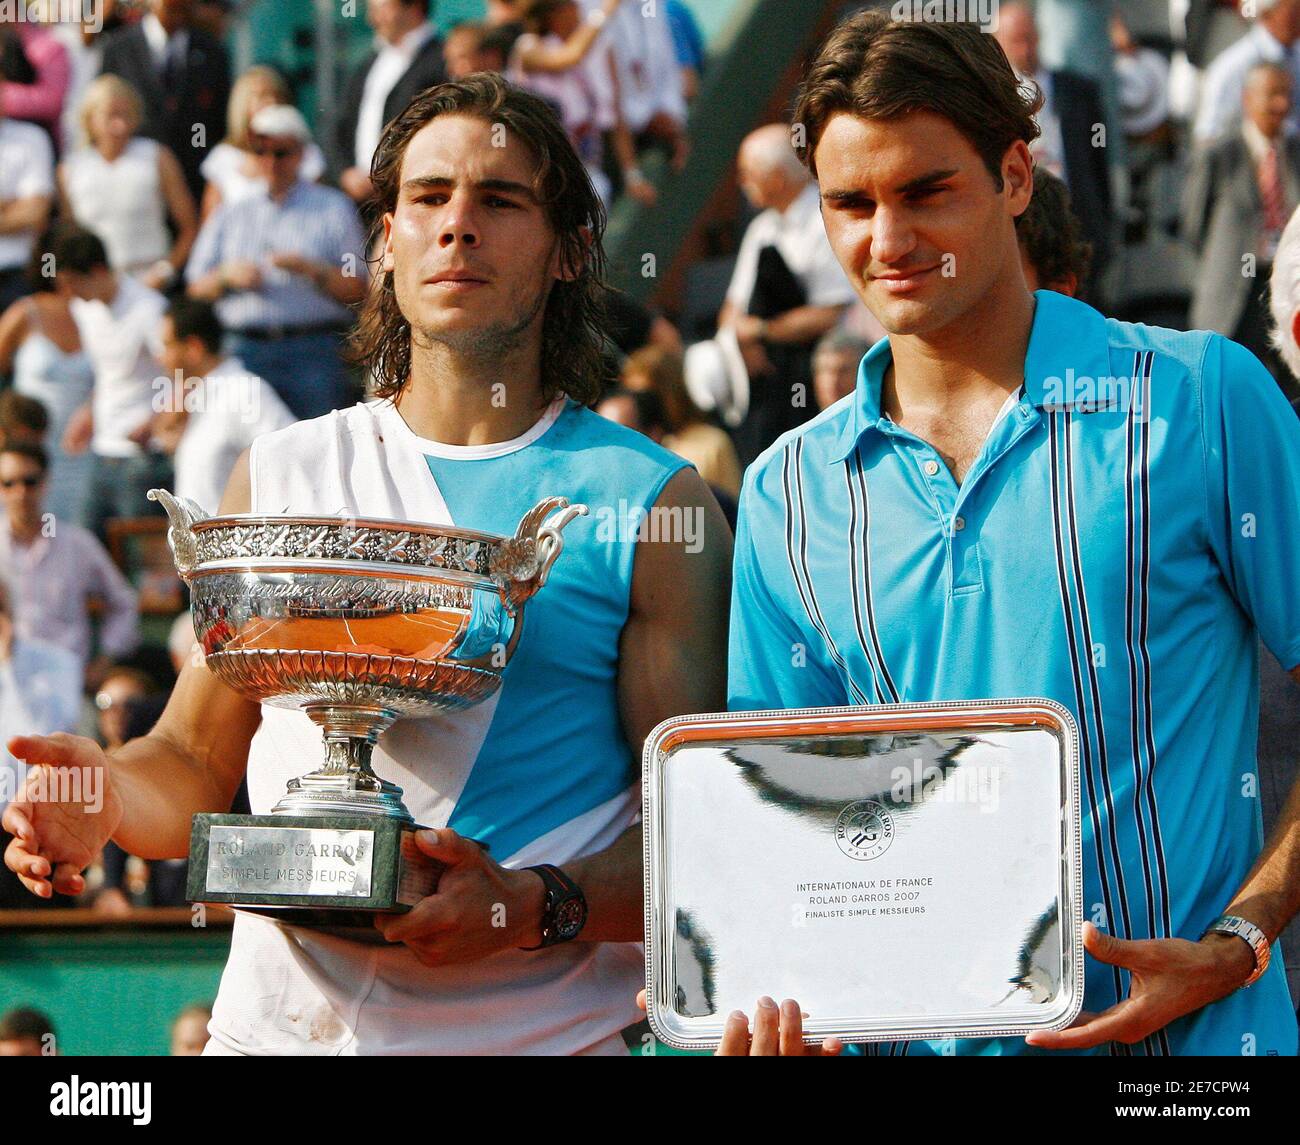 Spain's Rafael Nadal (L) stands with Switzerland's Roger Federer after  winning the men's final match at the French Open tennis tournament at Roland  Garros in Paris June 10, 2007. Nadal captured a